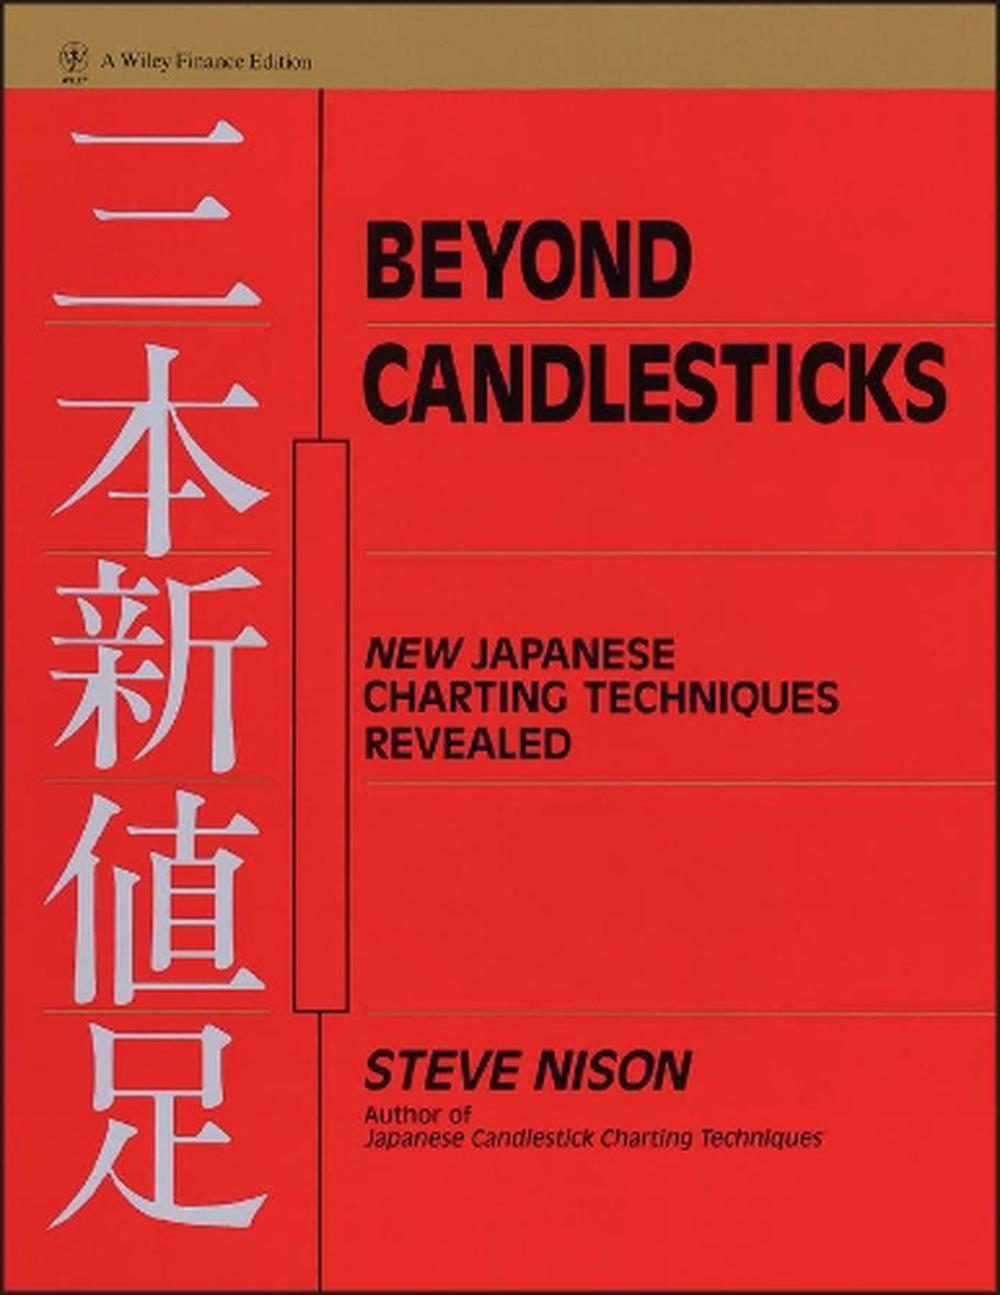 japanese candlestick charting techniques by steve nison